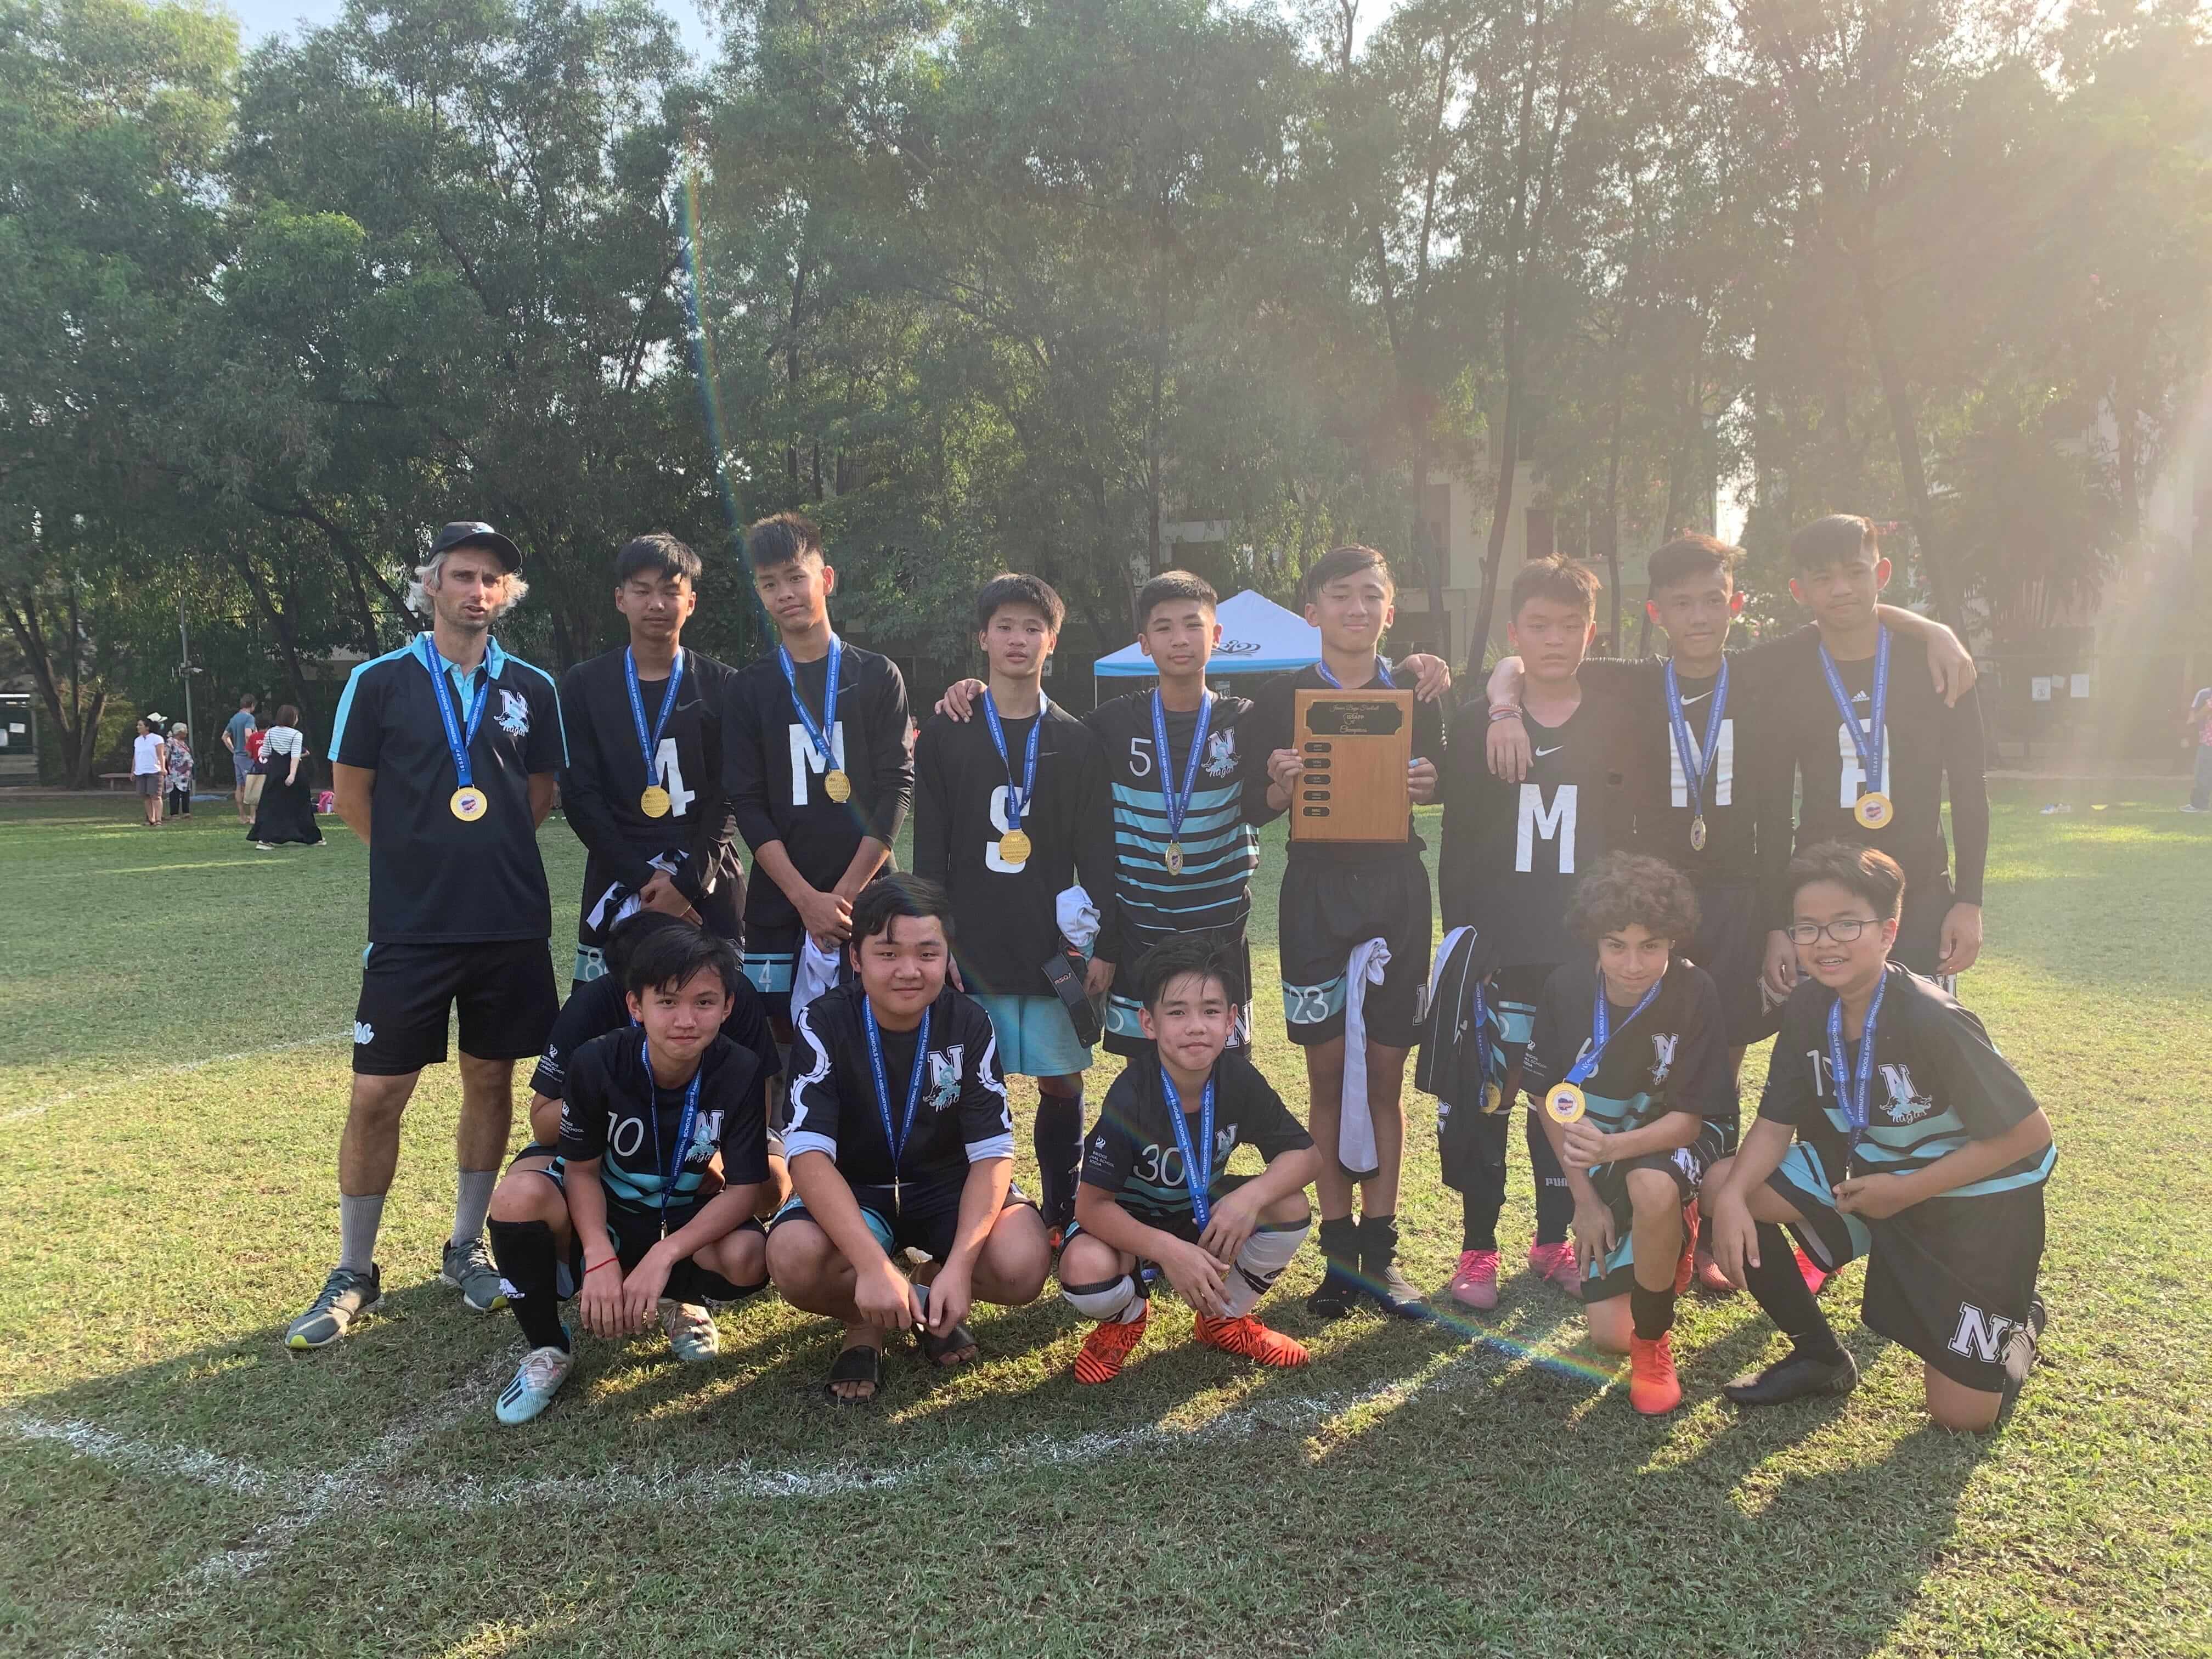 Ms Emma's Season 2 sports recap: why the start of 2020 was excellent for our Northbridge Nagas - ms-emmas-season-2-sports-recap-why-the-start-of-2020-was-excellent-for-our-northbridge-nagas